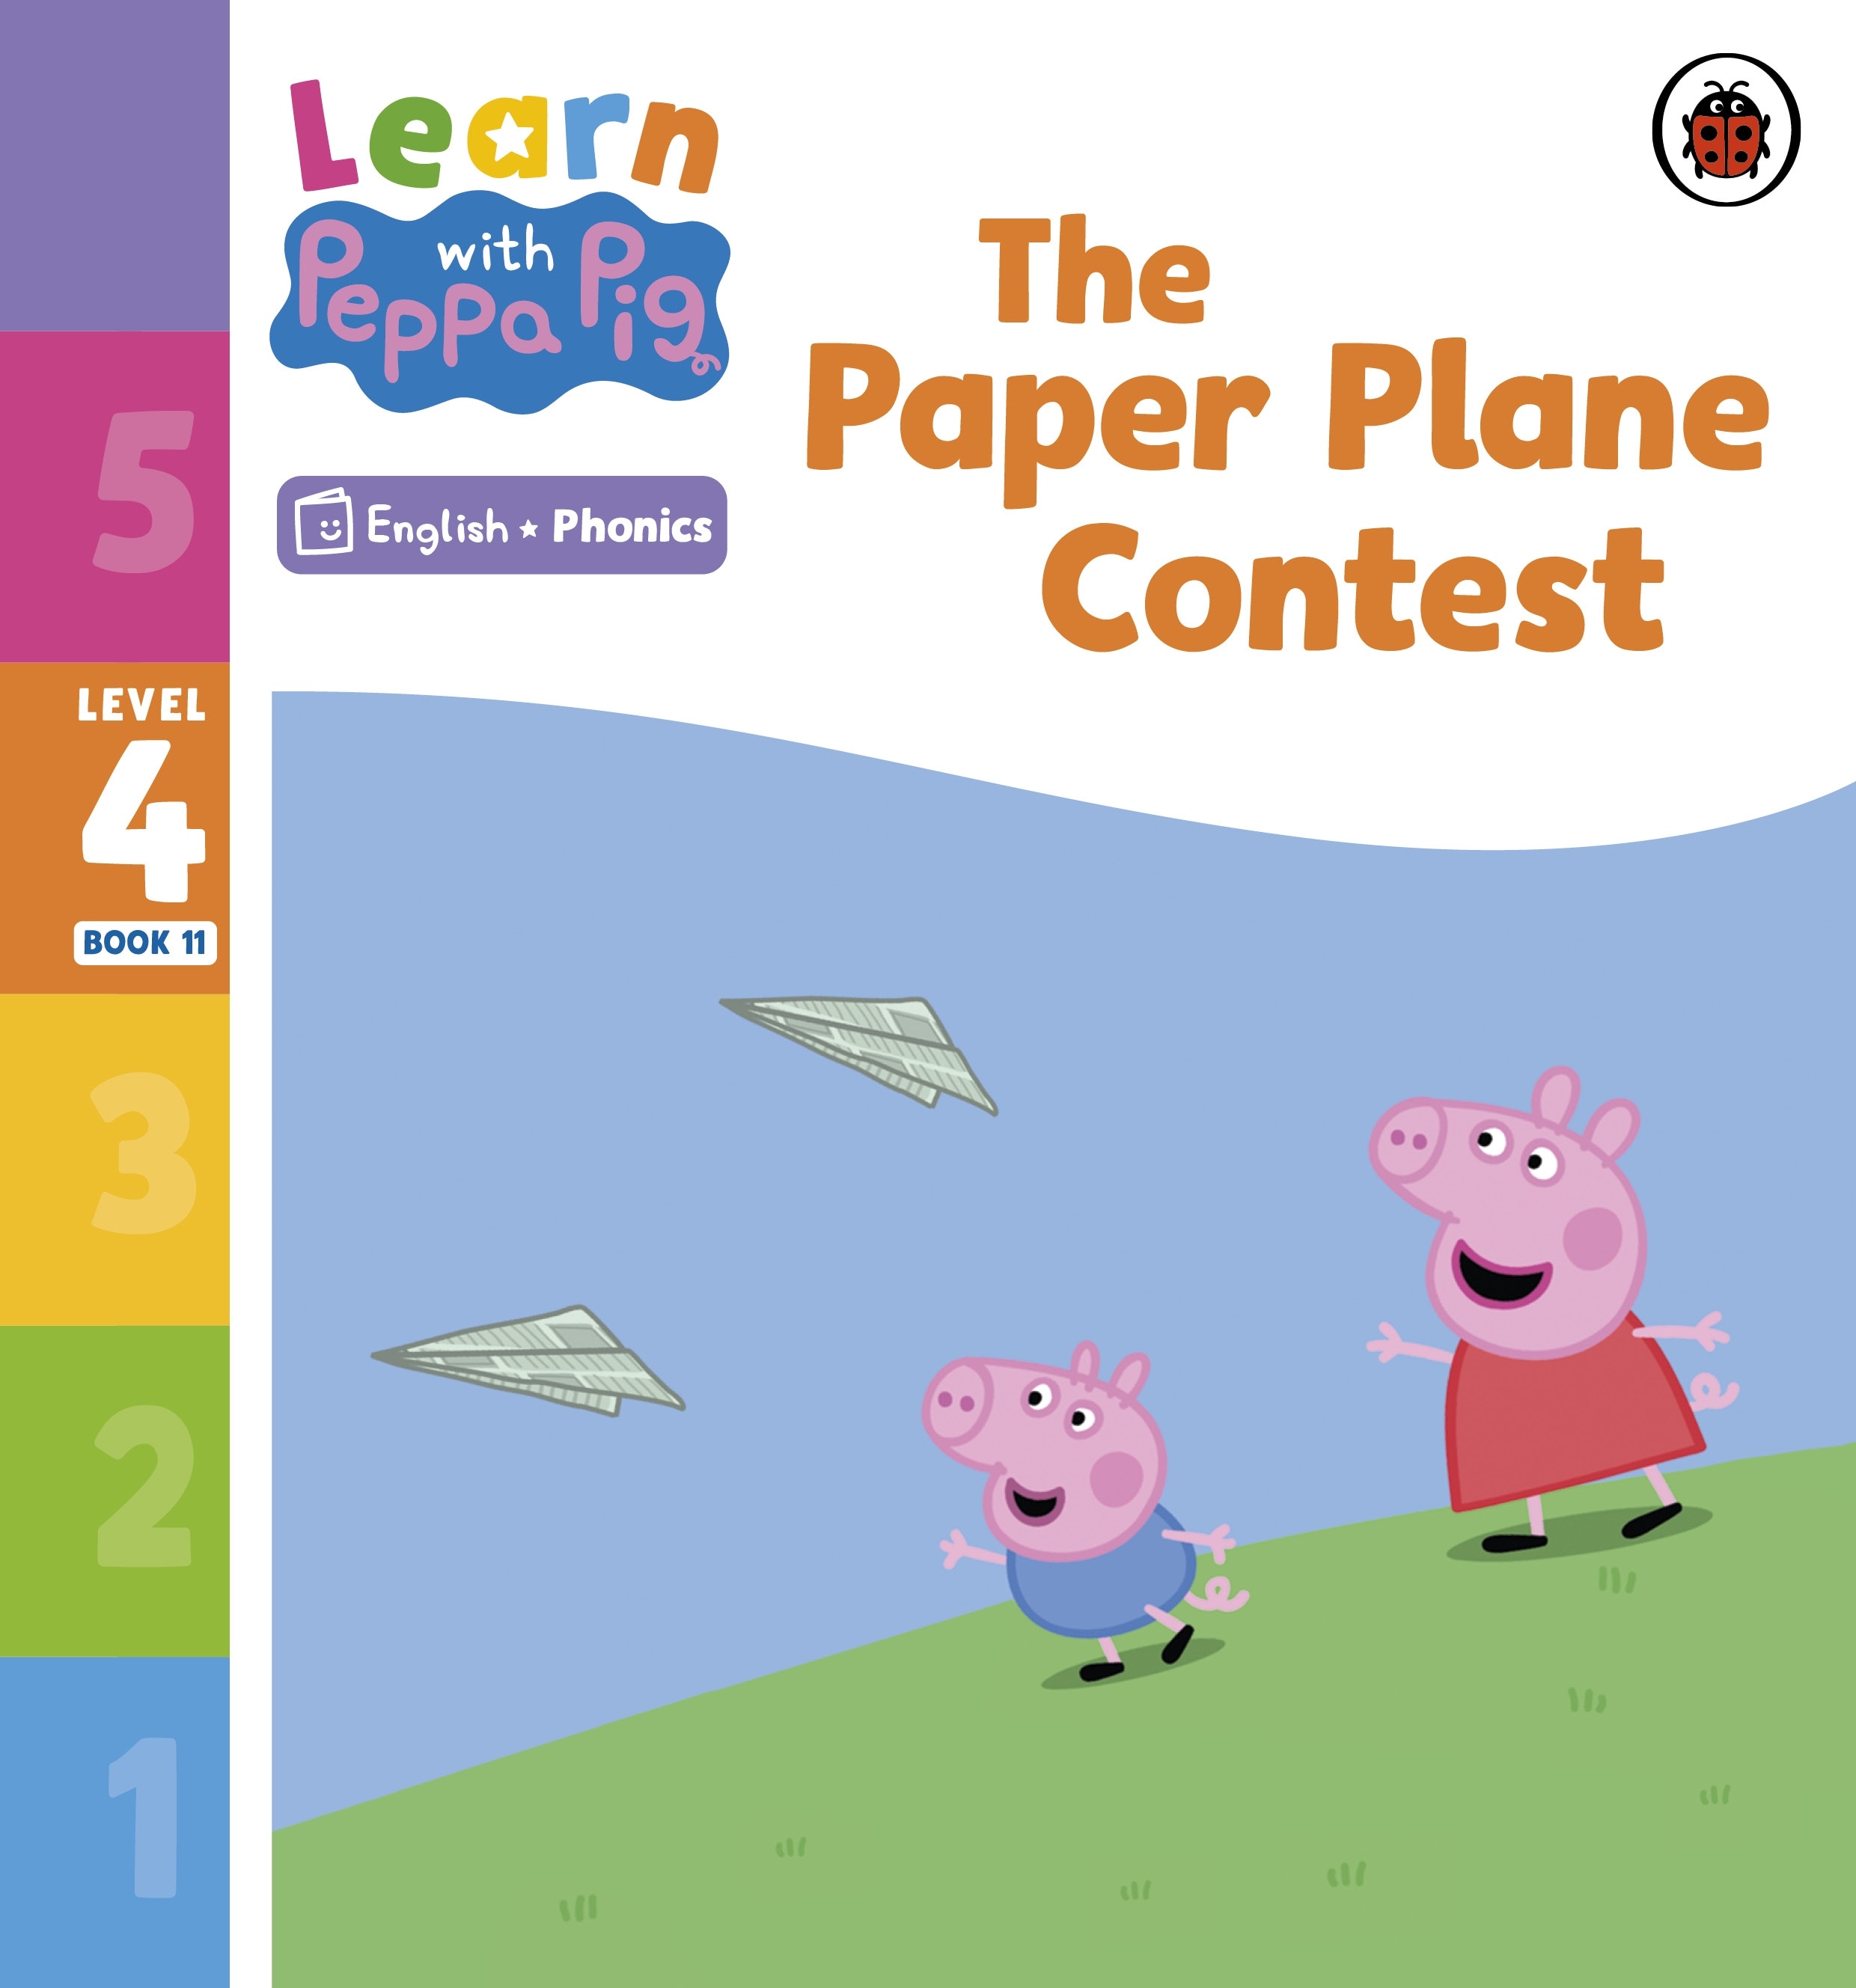 Book “Learn with Peppa Phonics Level 4 Book 11 — The Paper Plane Contest (Phonics Reader)” by Peppa Pig — January 5, 2023